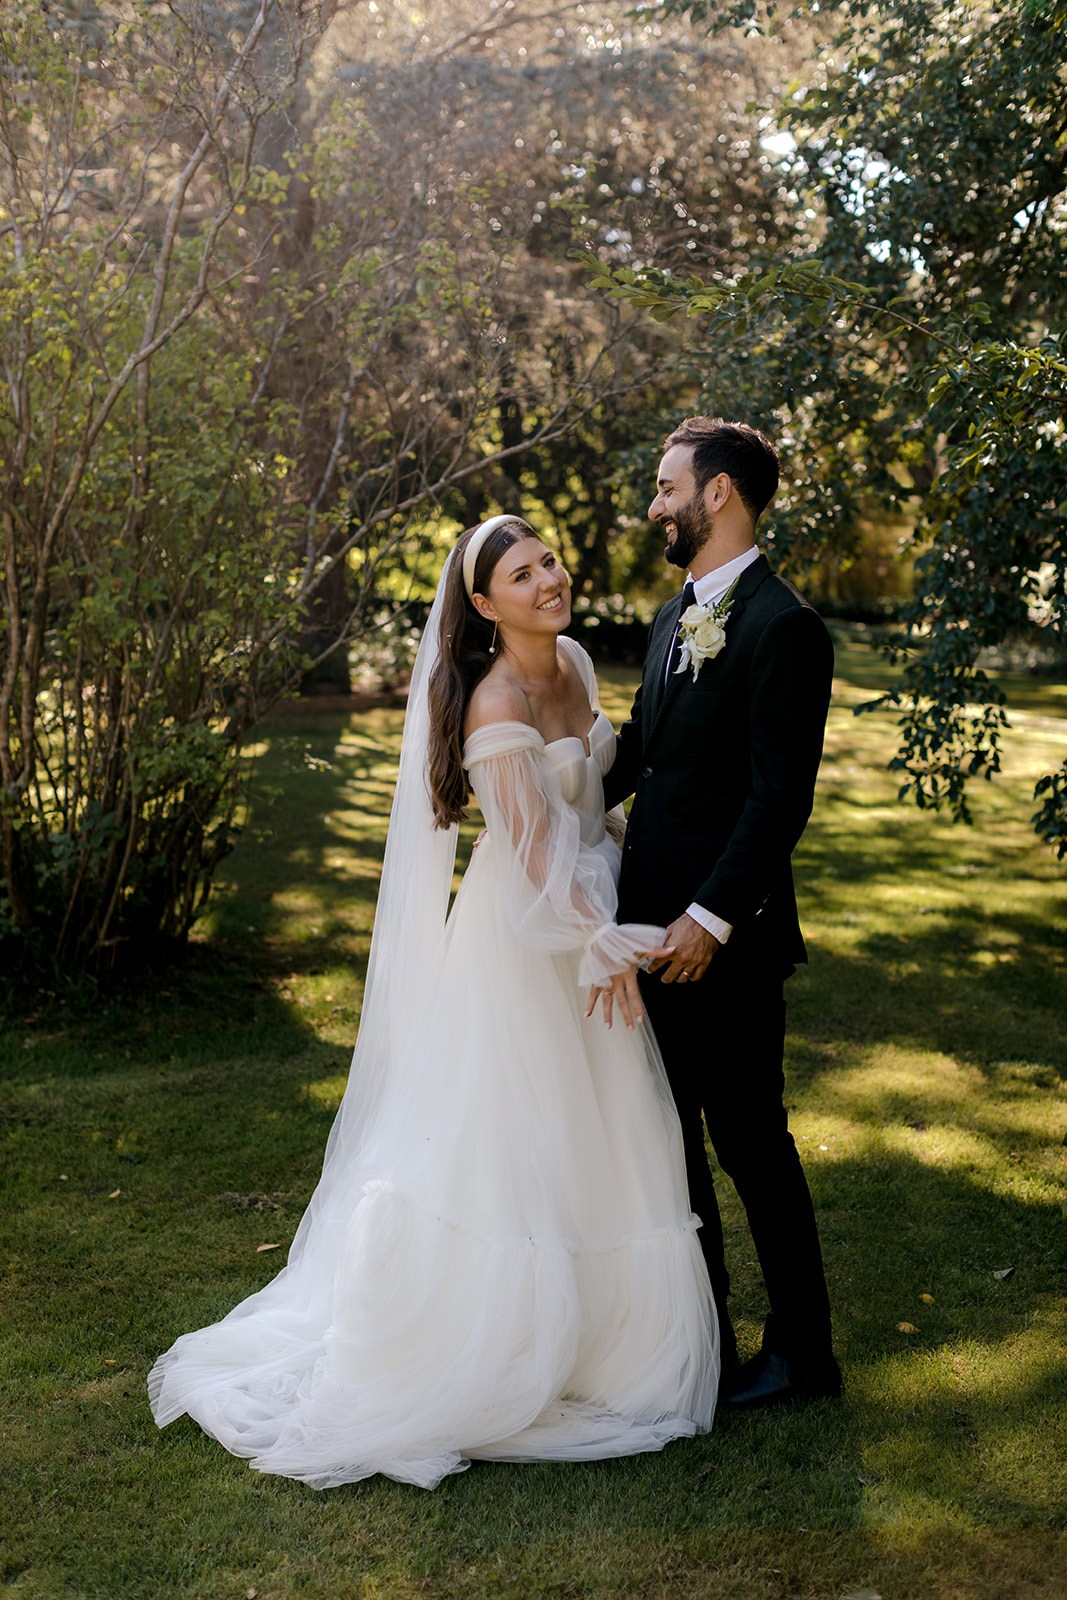 Portrait of bride & groom laughing in an English-inspired garden during their elegant country wedding.